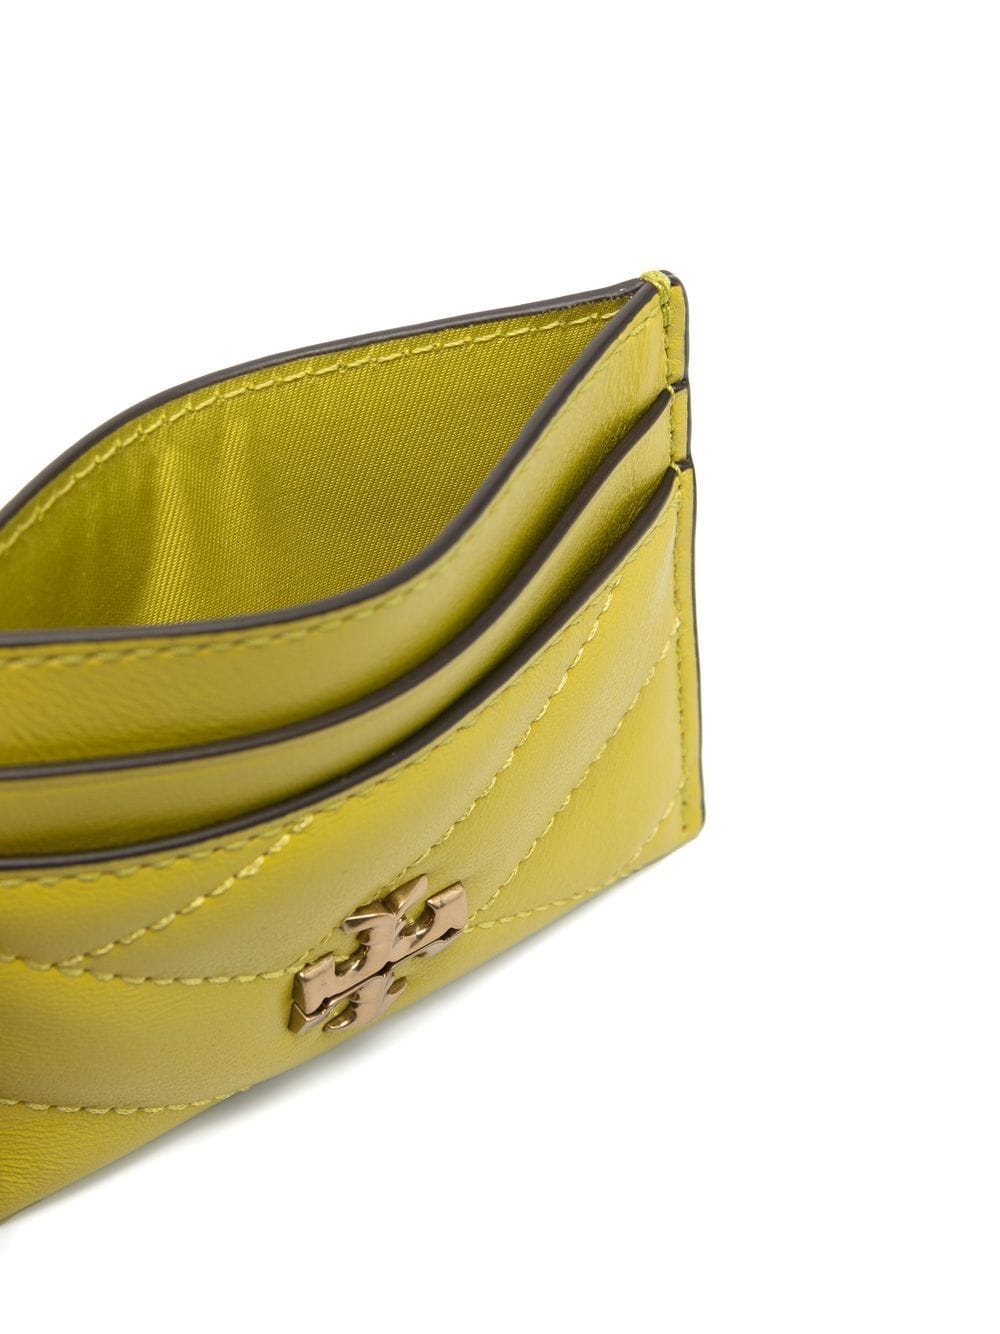 TORY BURCH: Kira bag in quilted leather - Lemon